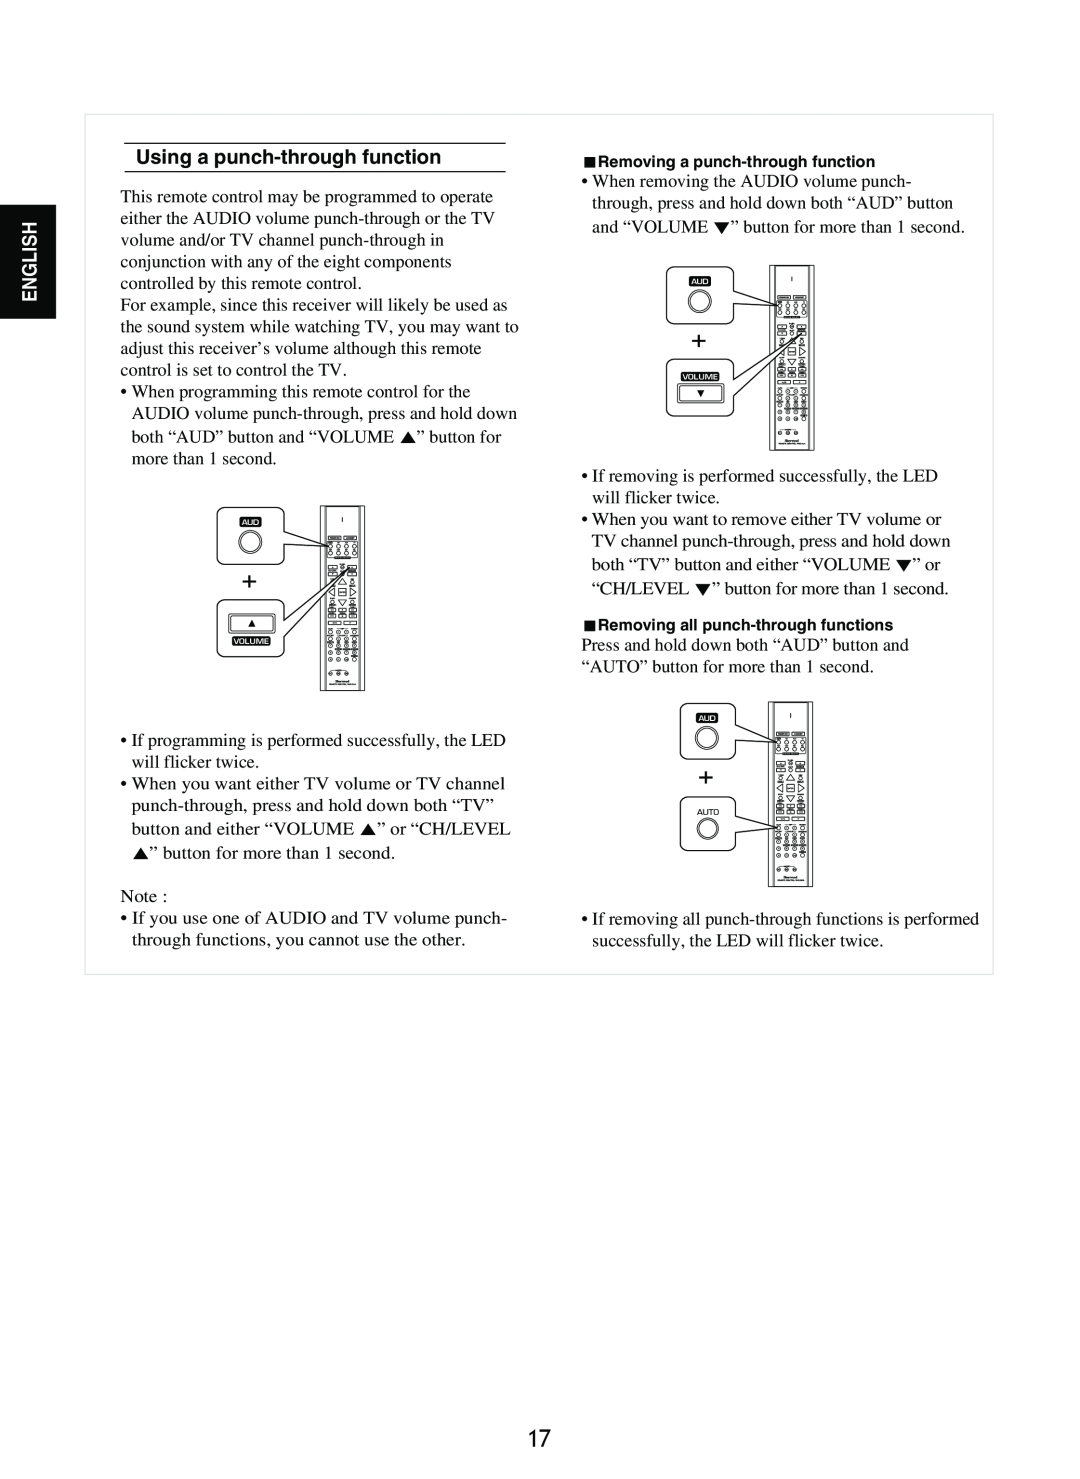 Sherwood RD-8601 operating instructions Using a punch-throughfunction, English 